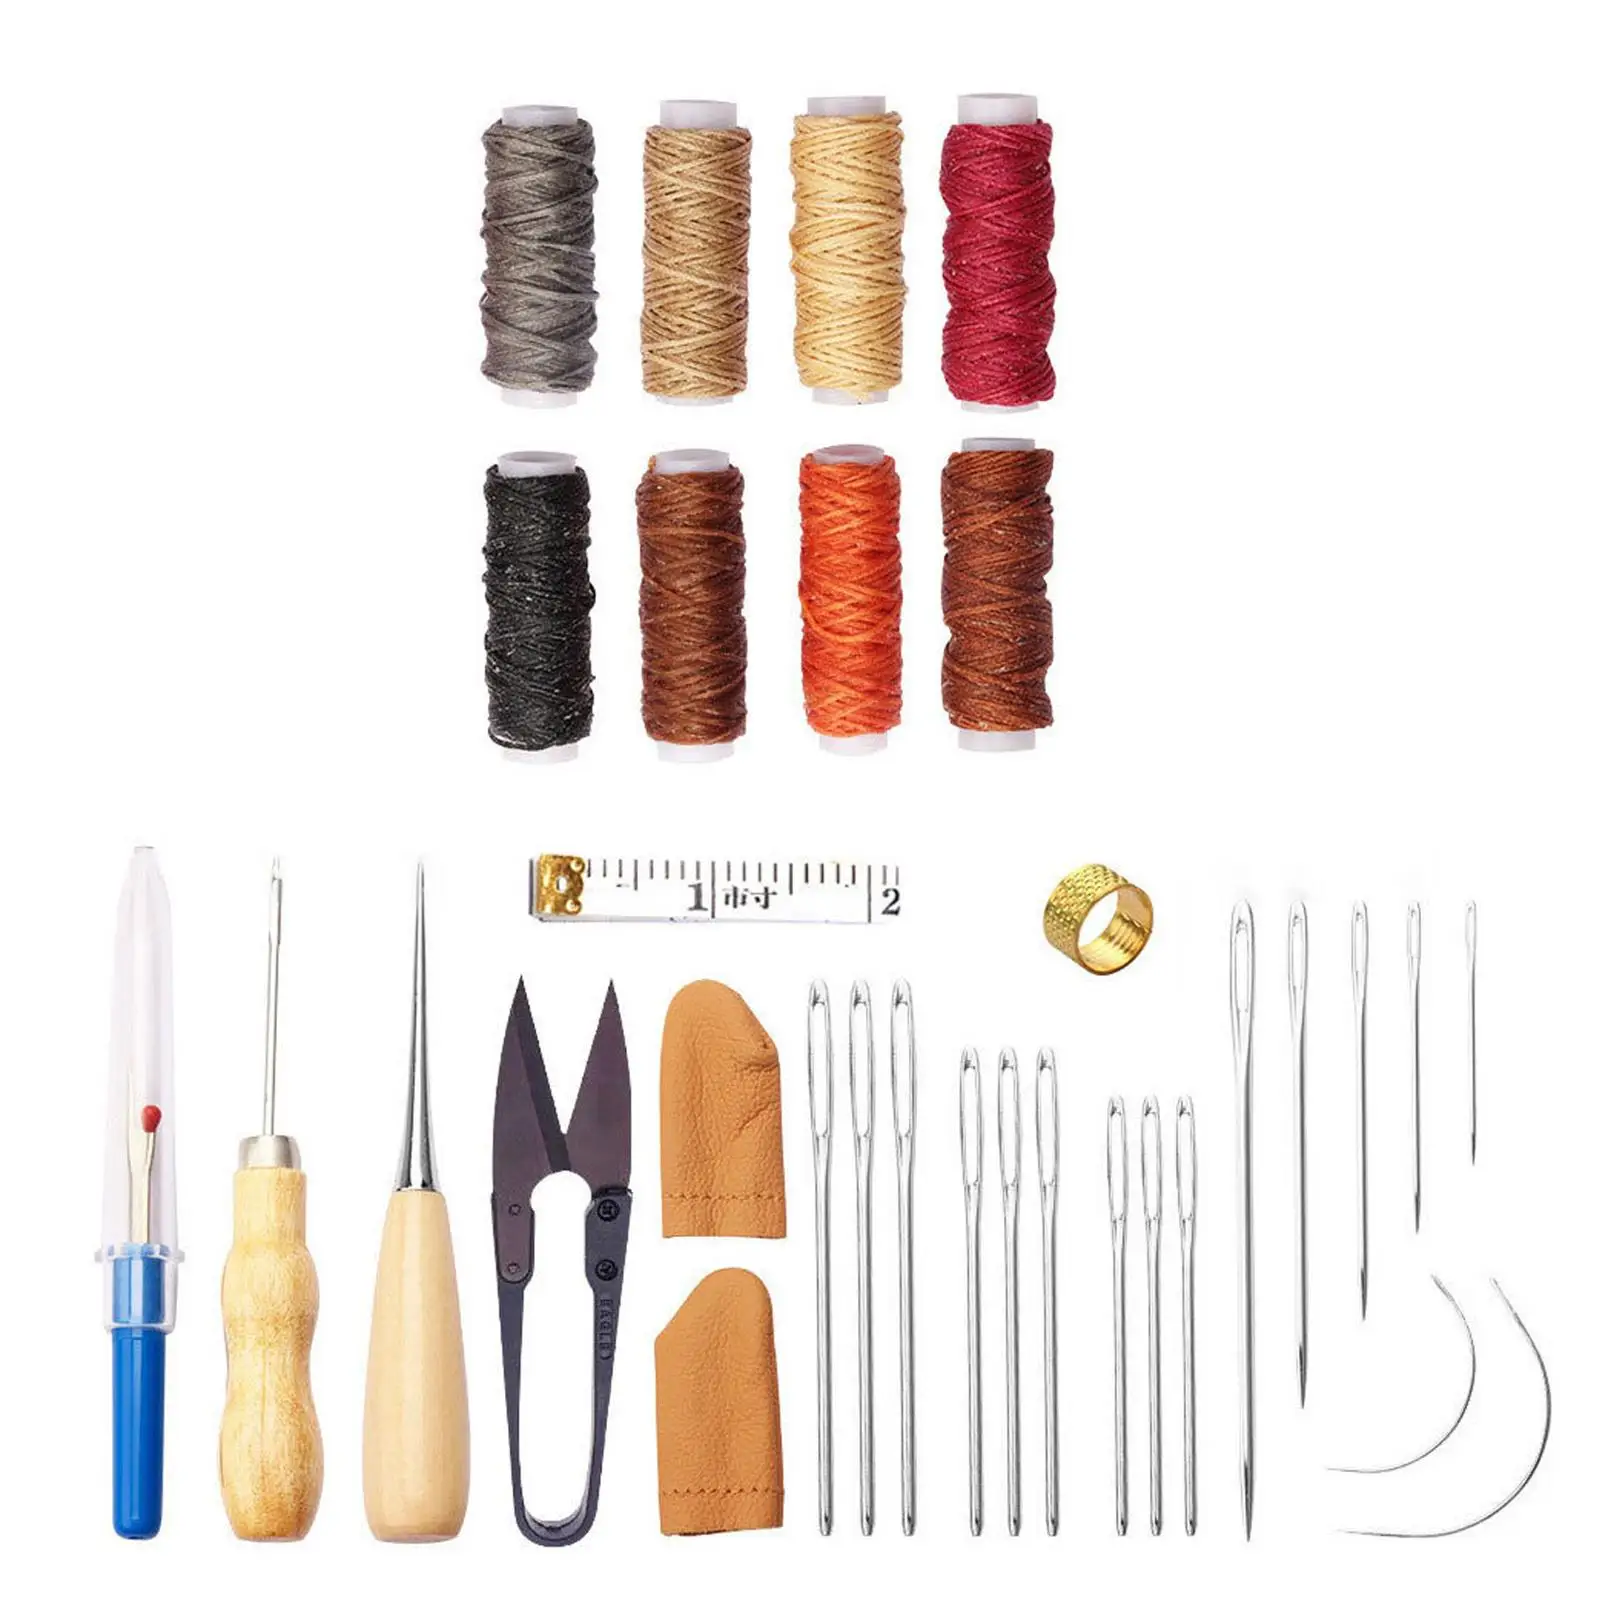 32Pcs Leather Tools Kit DIY Tool Set Leather Crafting Tools and Supplies Large Eye Stitching Needles Leather Working Tools